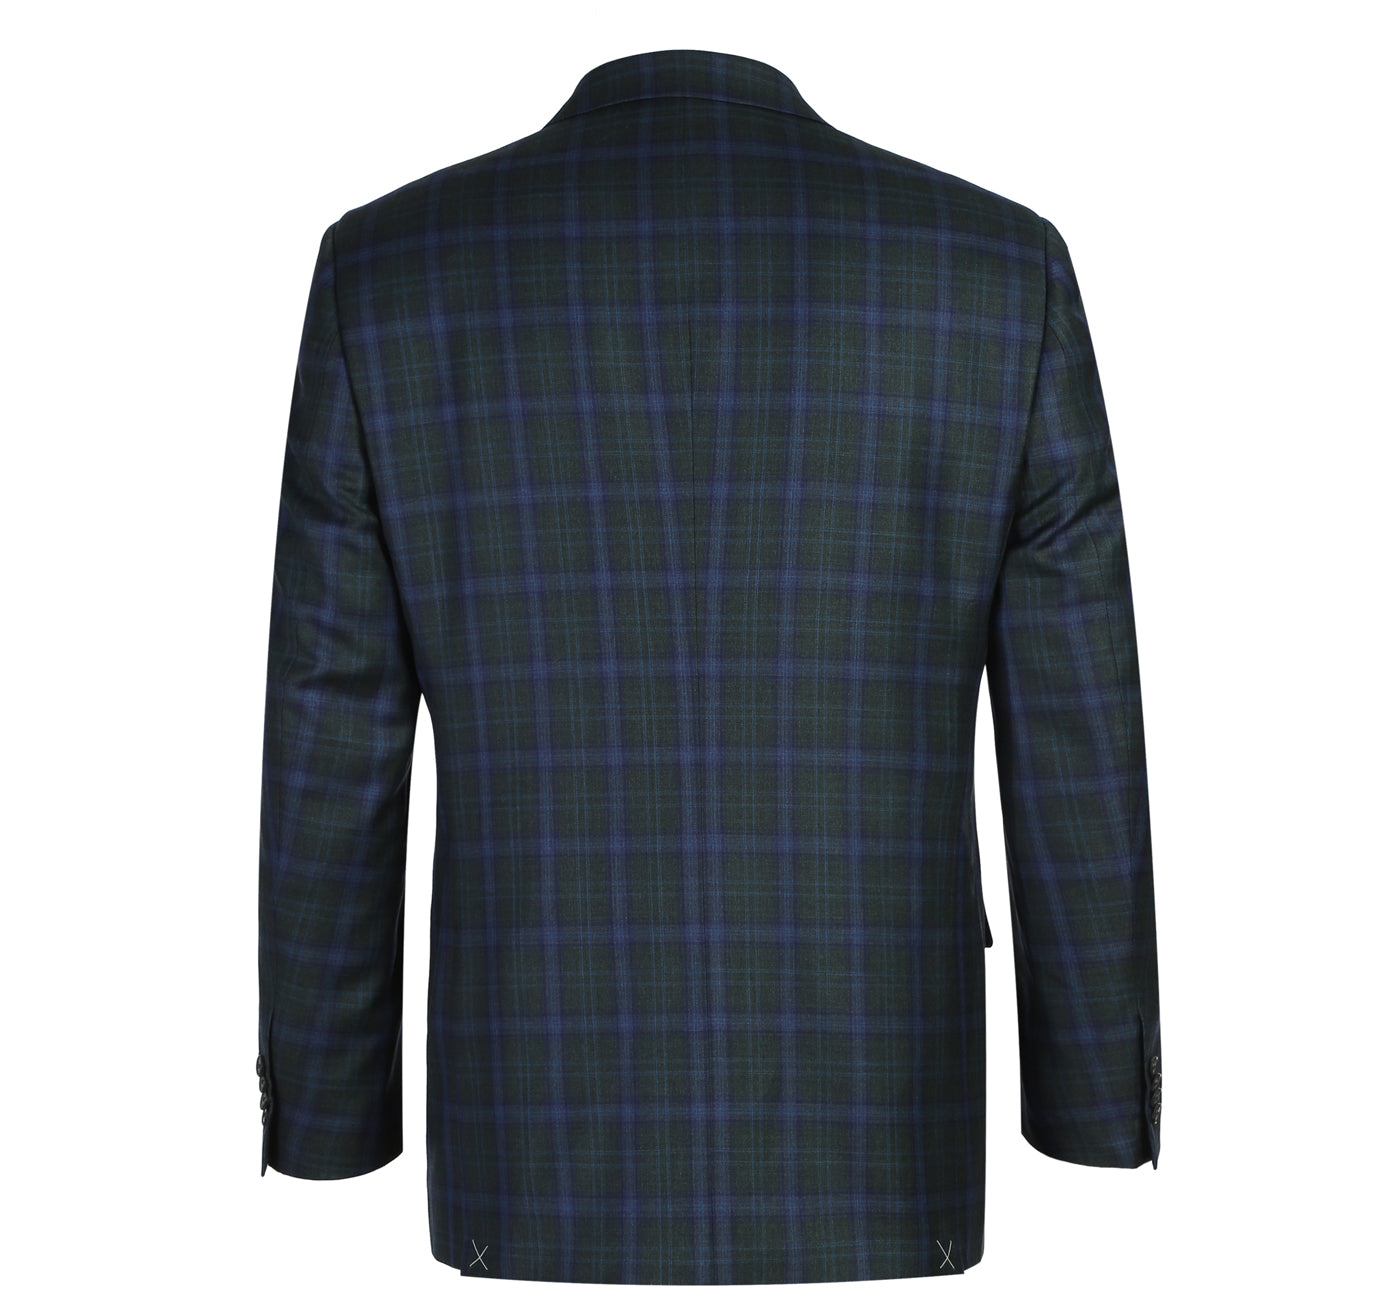 Men’s Classic Fit 100% Wool Charcoal Grey & Blue Check Jacket with Notch Lapel 3